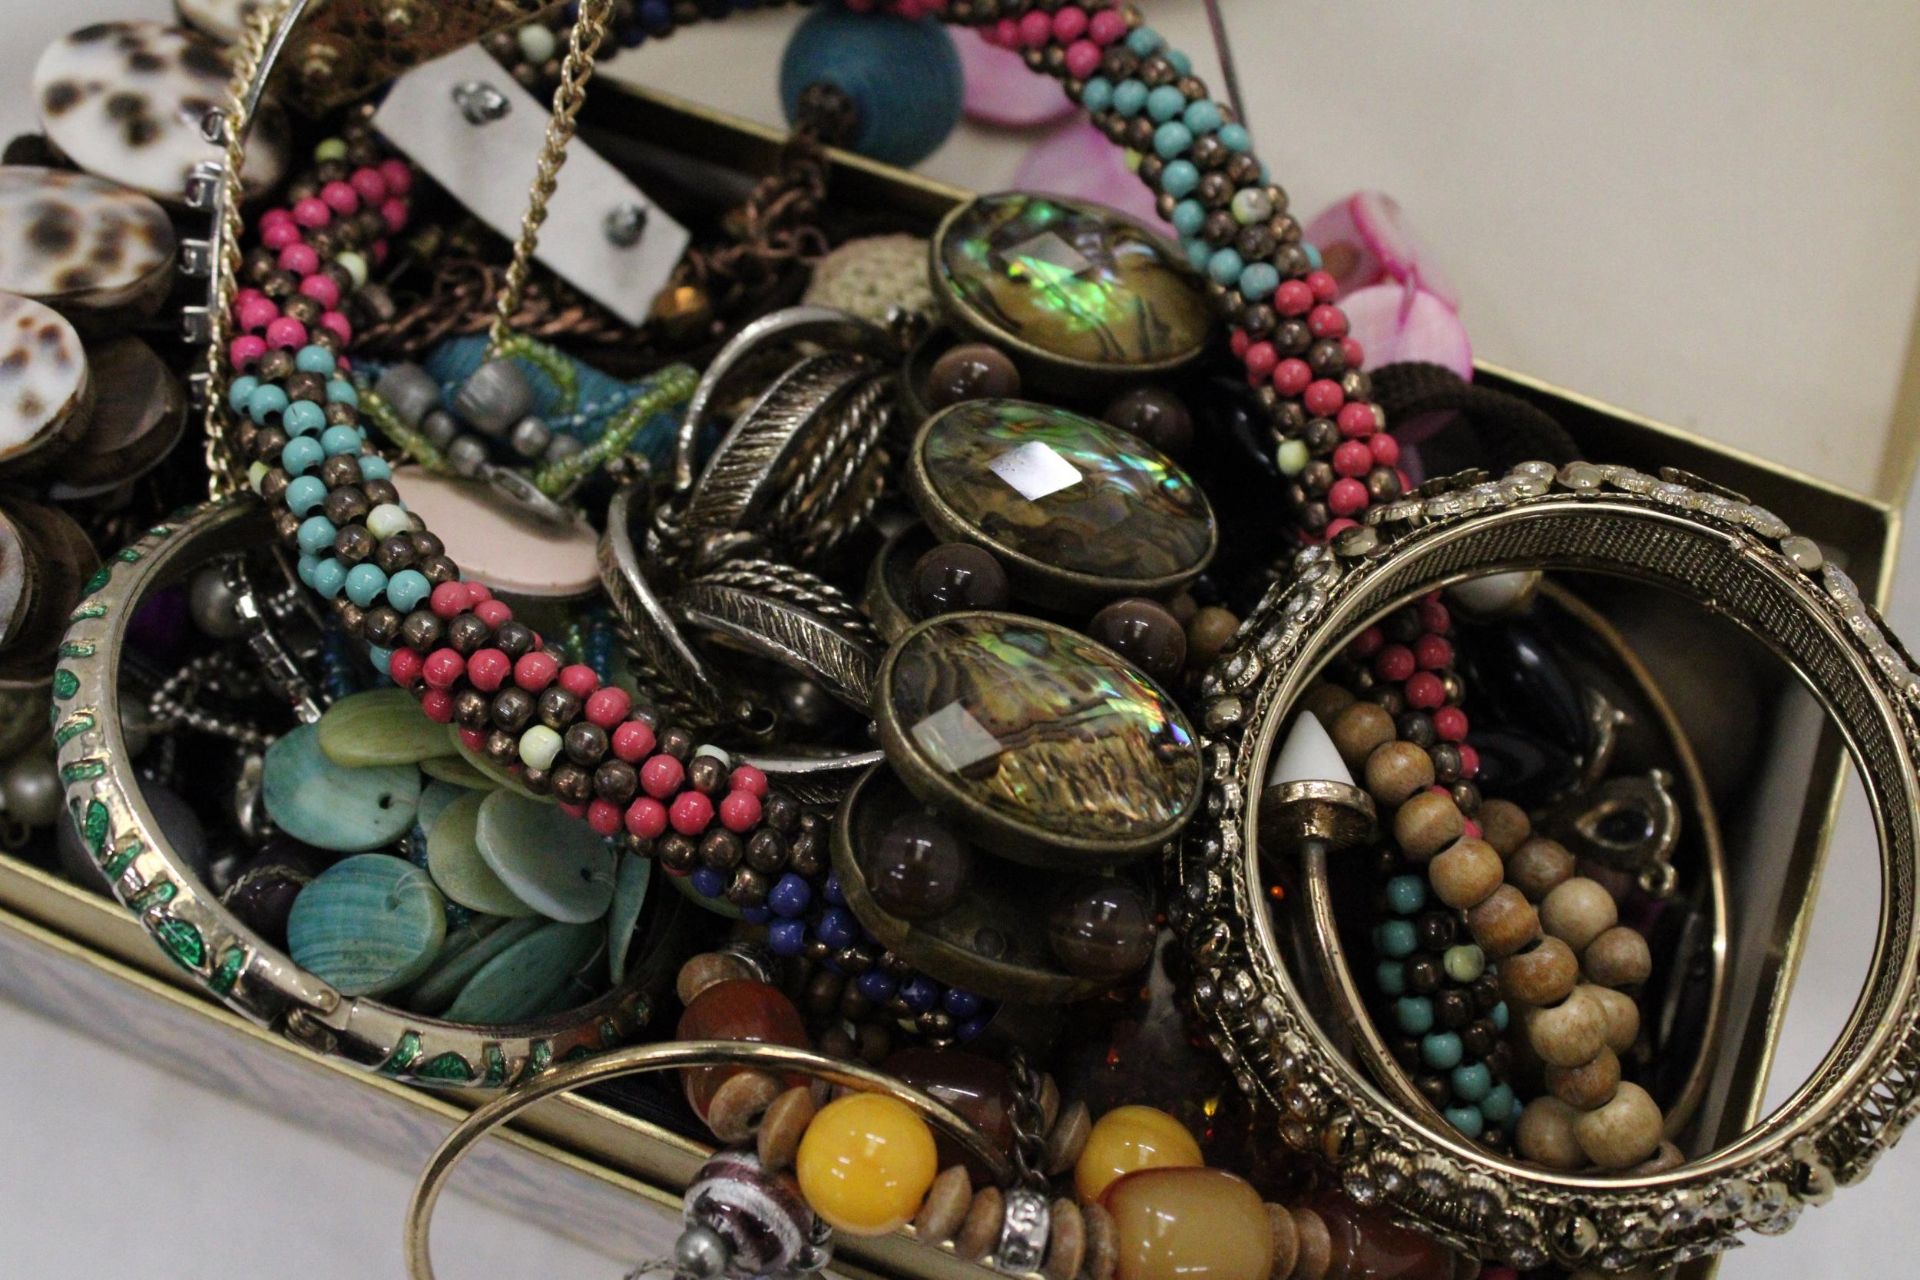 A QUANTITY OF COSTUME JEWELLERY TO INCLUDE NECKLACES, EARRINGS, BANGLES, ETC, IN A DOMED BOX - Image 3 of 5